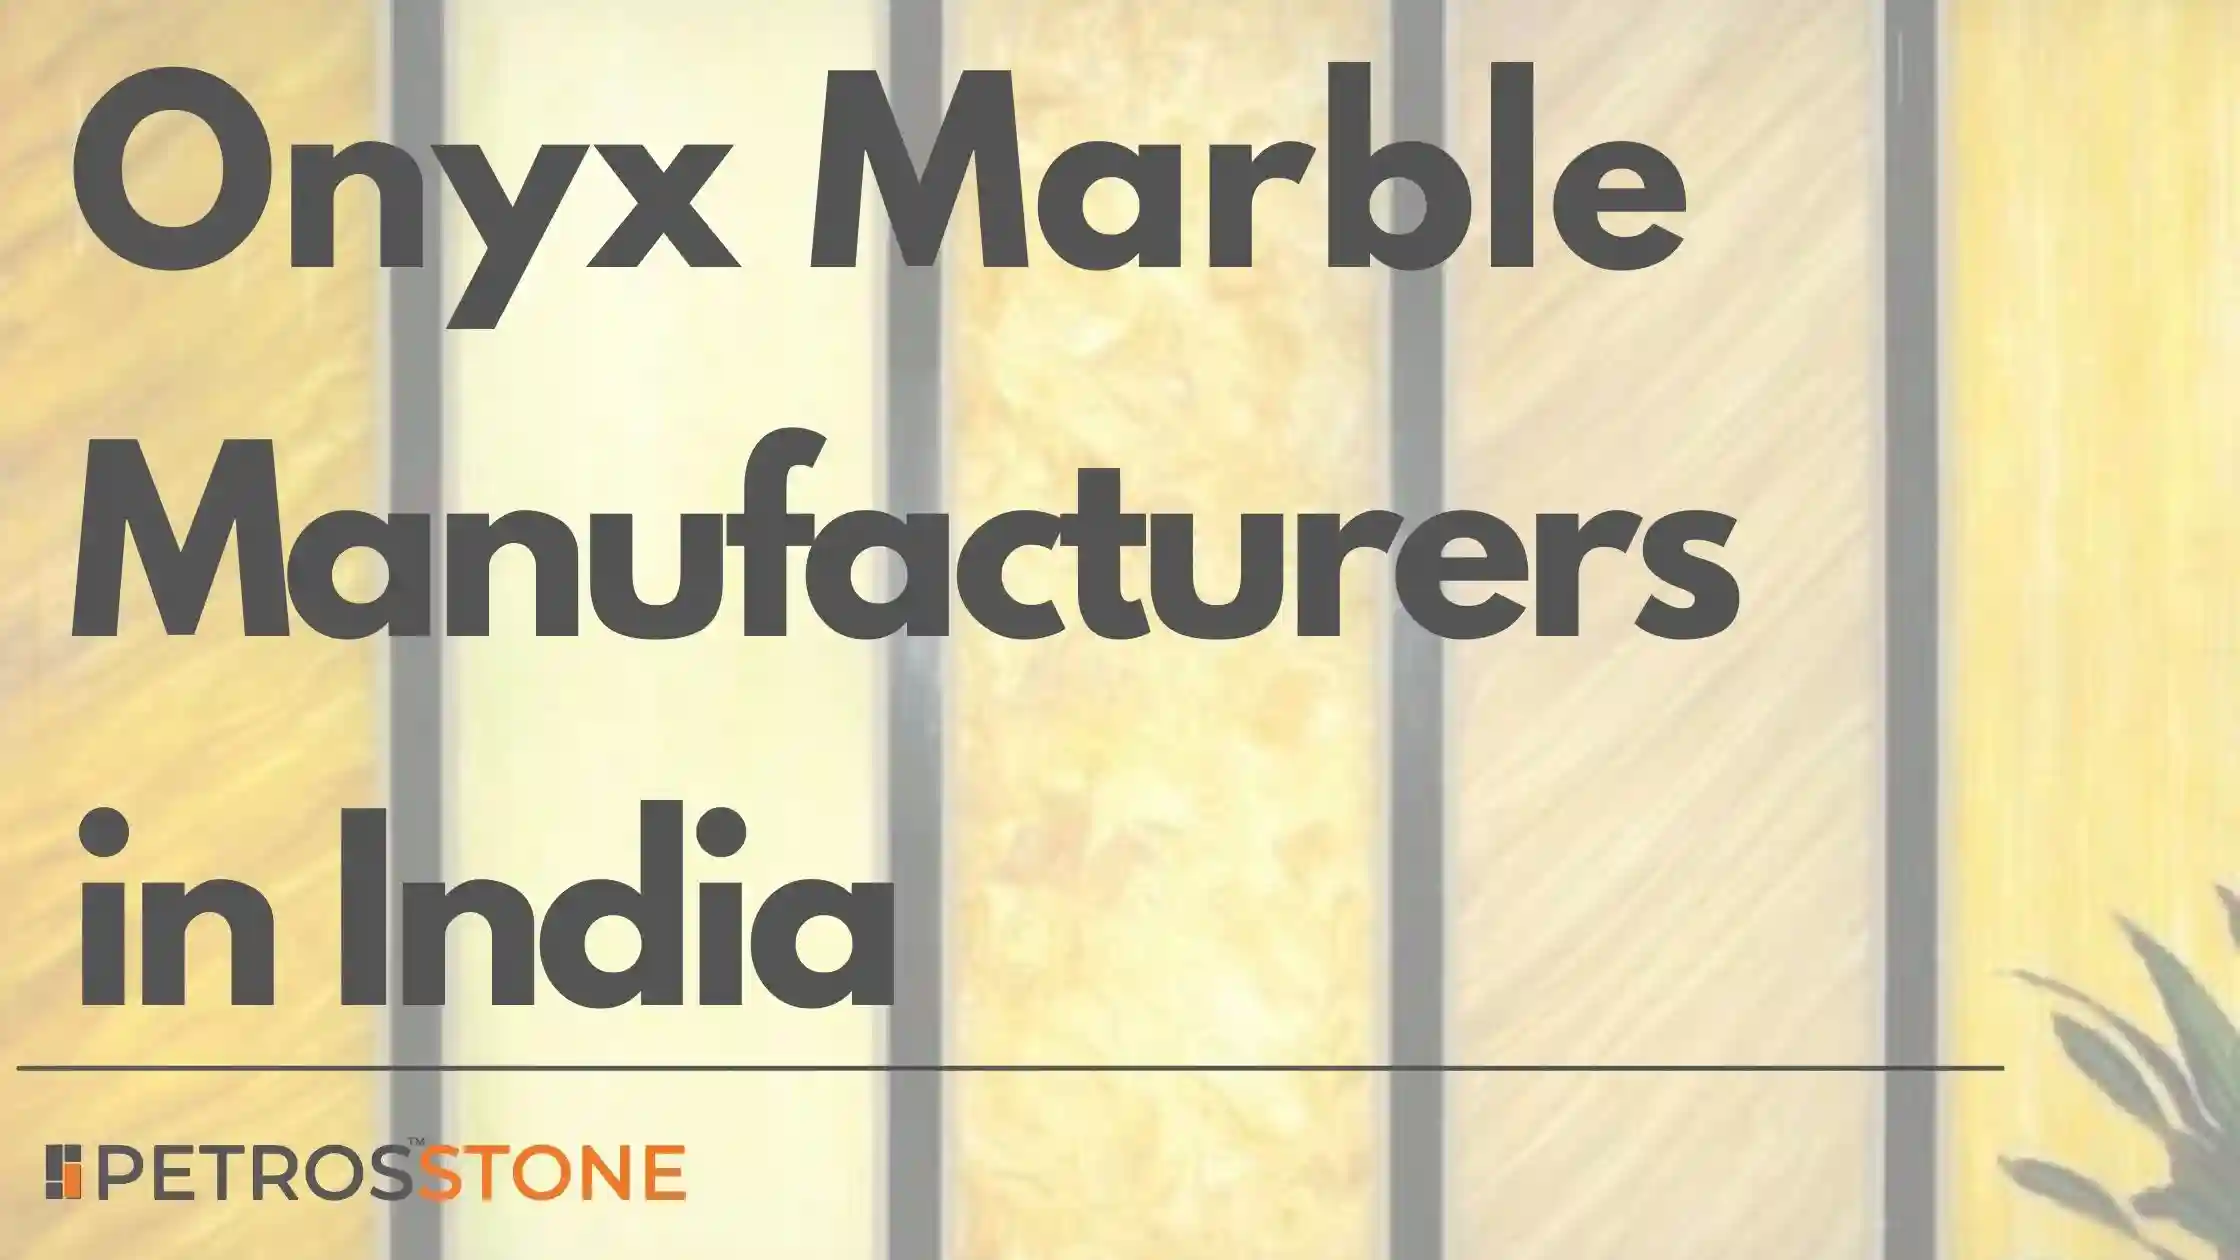 Onyx marble manufactures India